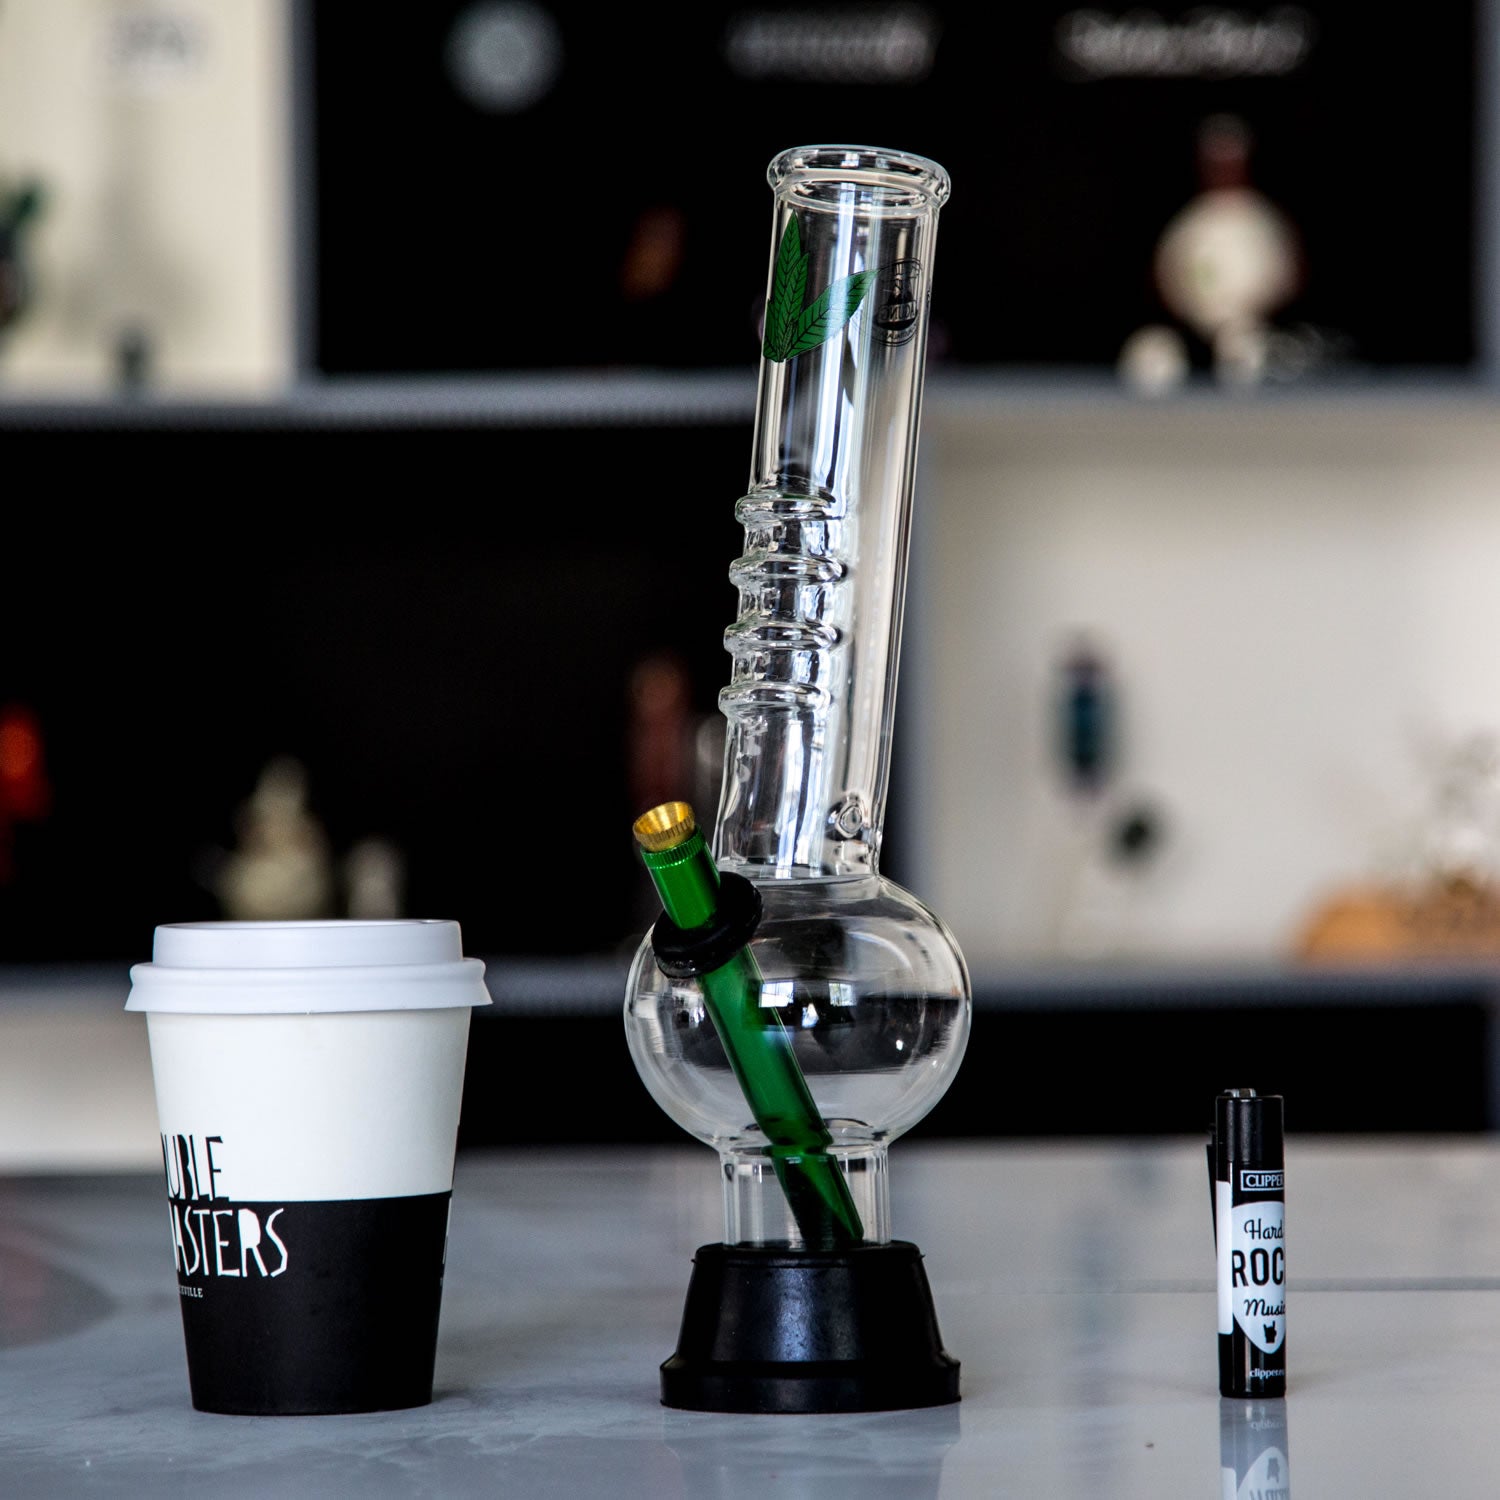 Agung glass bong with metal stem and brass cone piece for Aussie weed smokers.